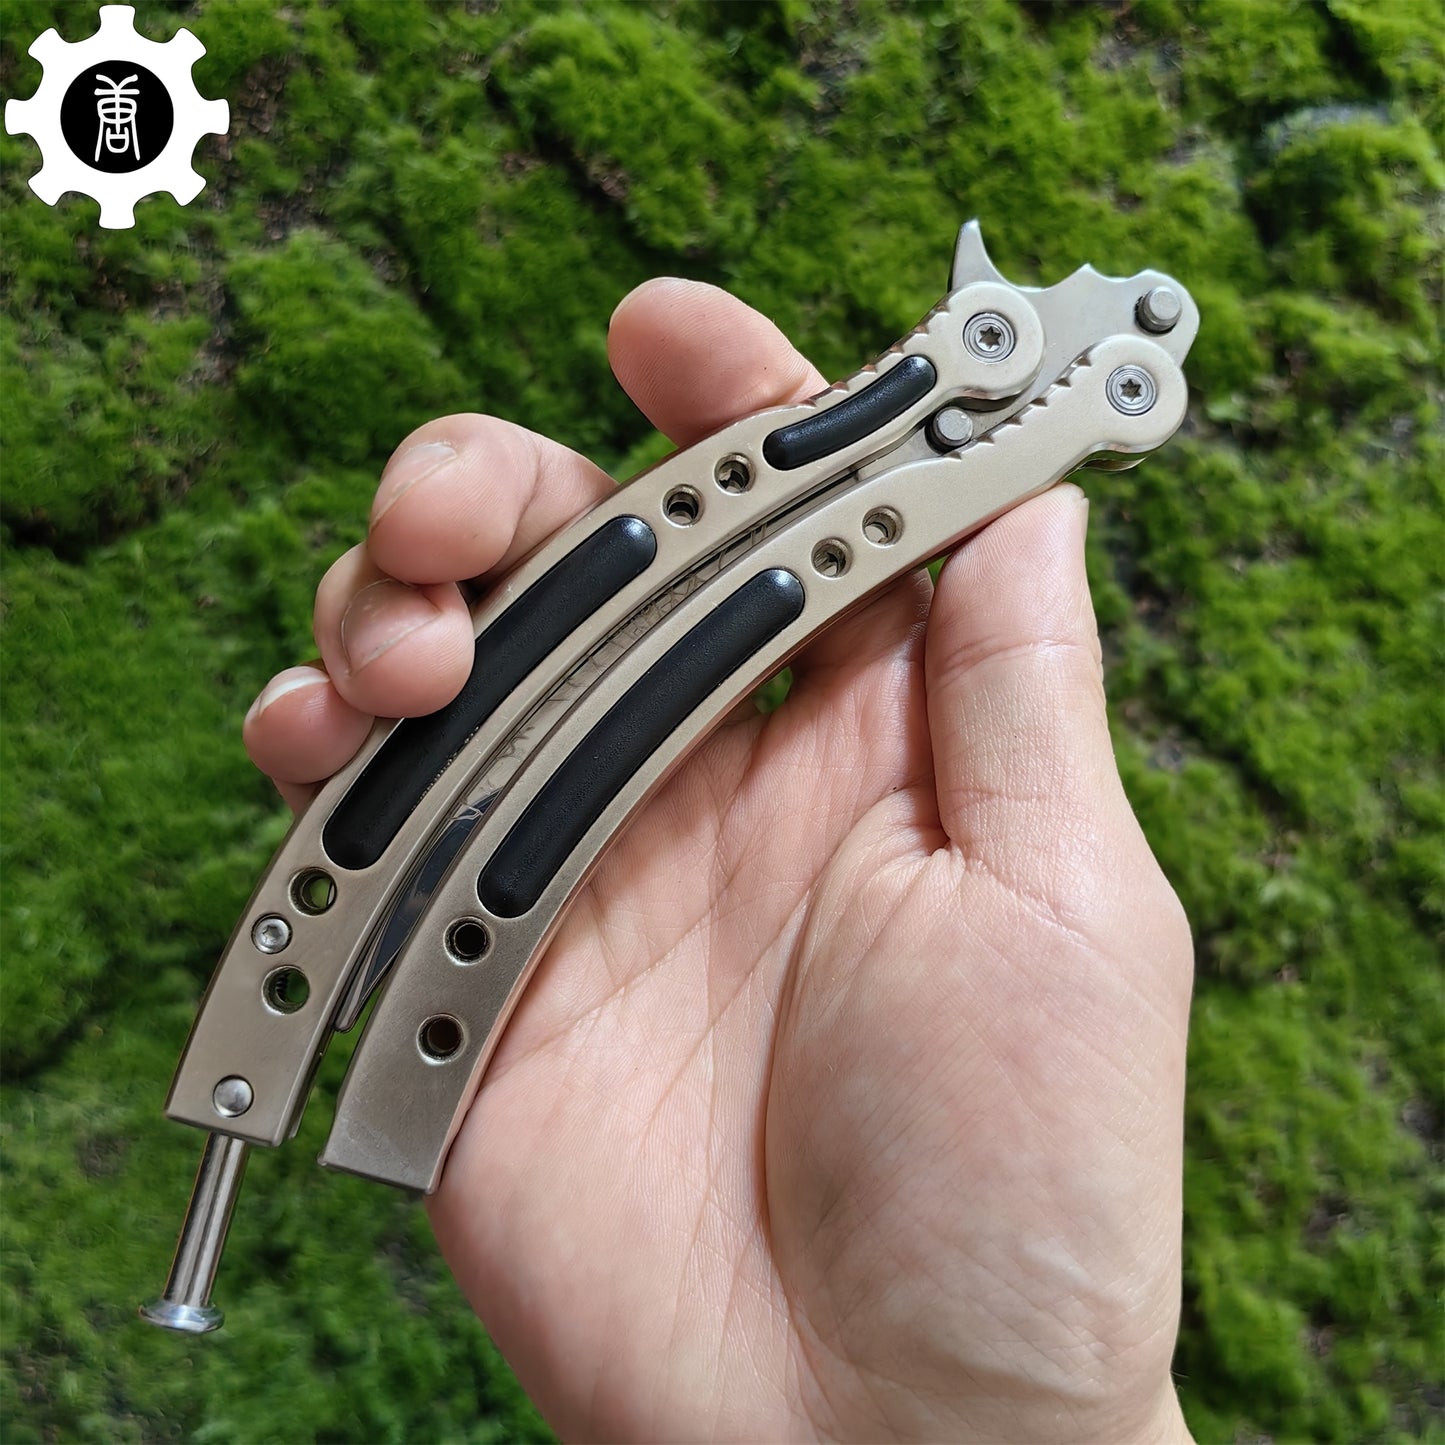 Brown Chrome Butterfly Knife Game Metal Balisong